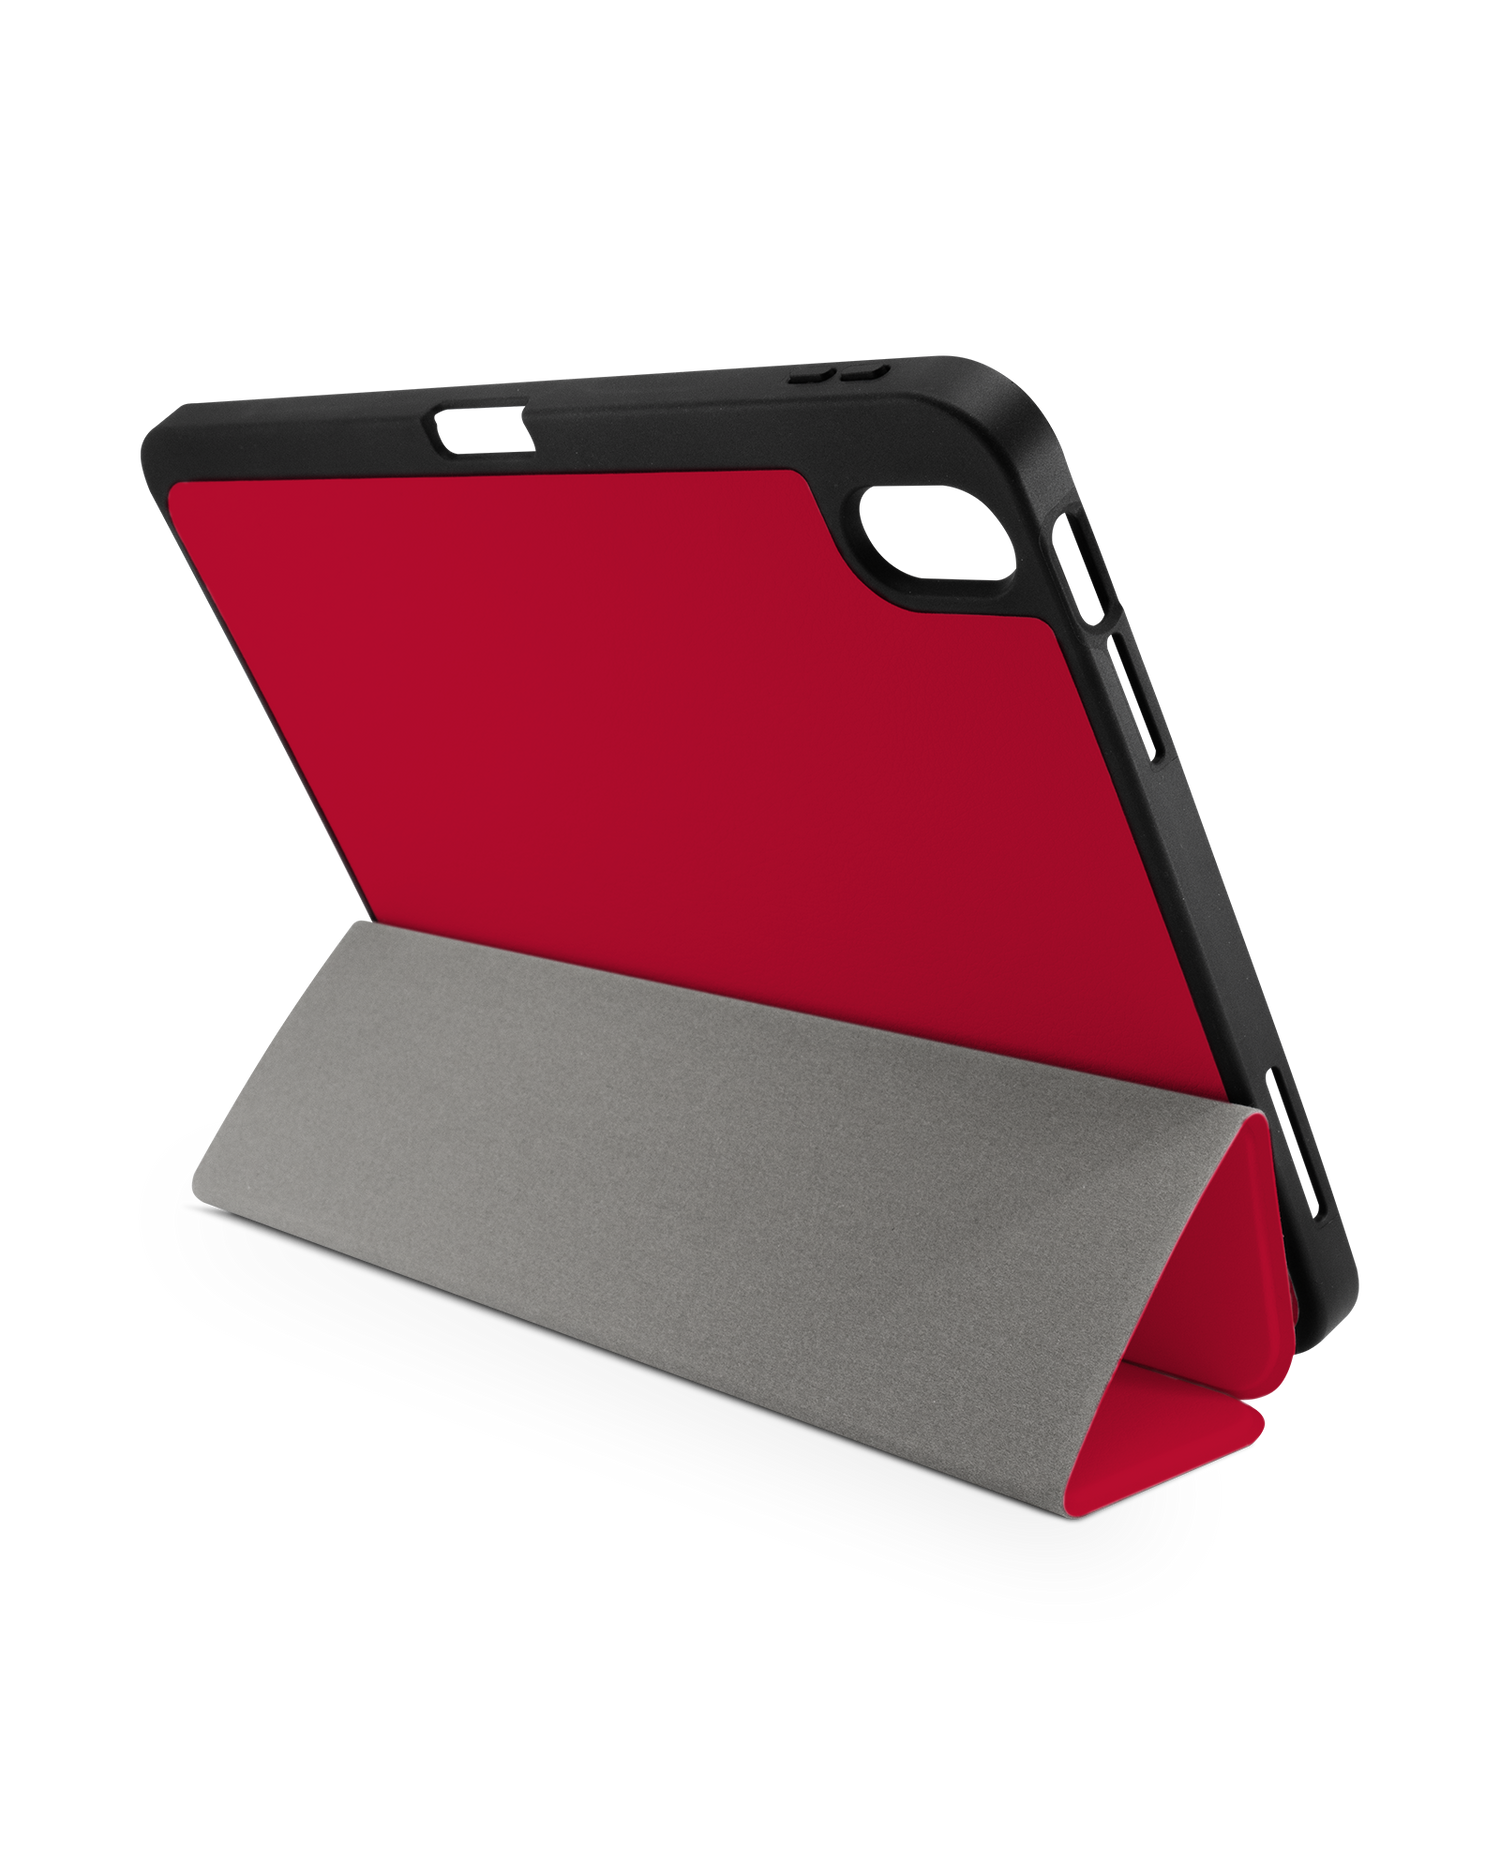 RED iPad Case with Pencil Holder for Apple iPad (10th Generation): Set up in landscape format (back view)